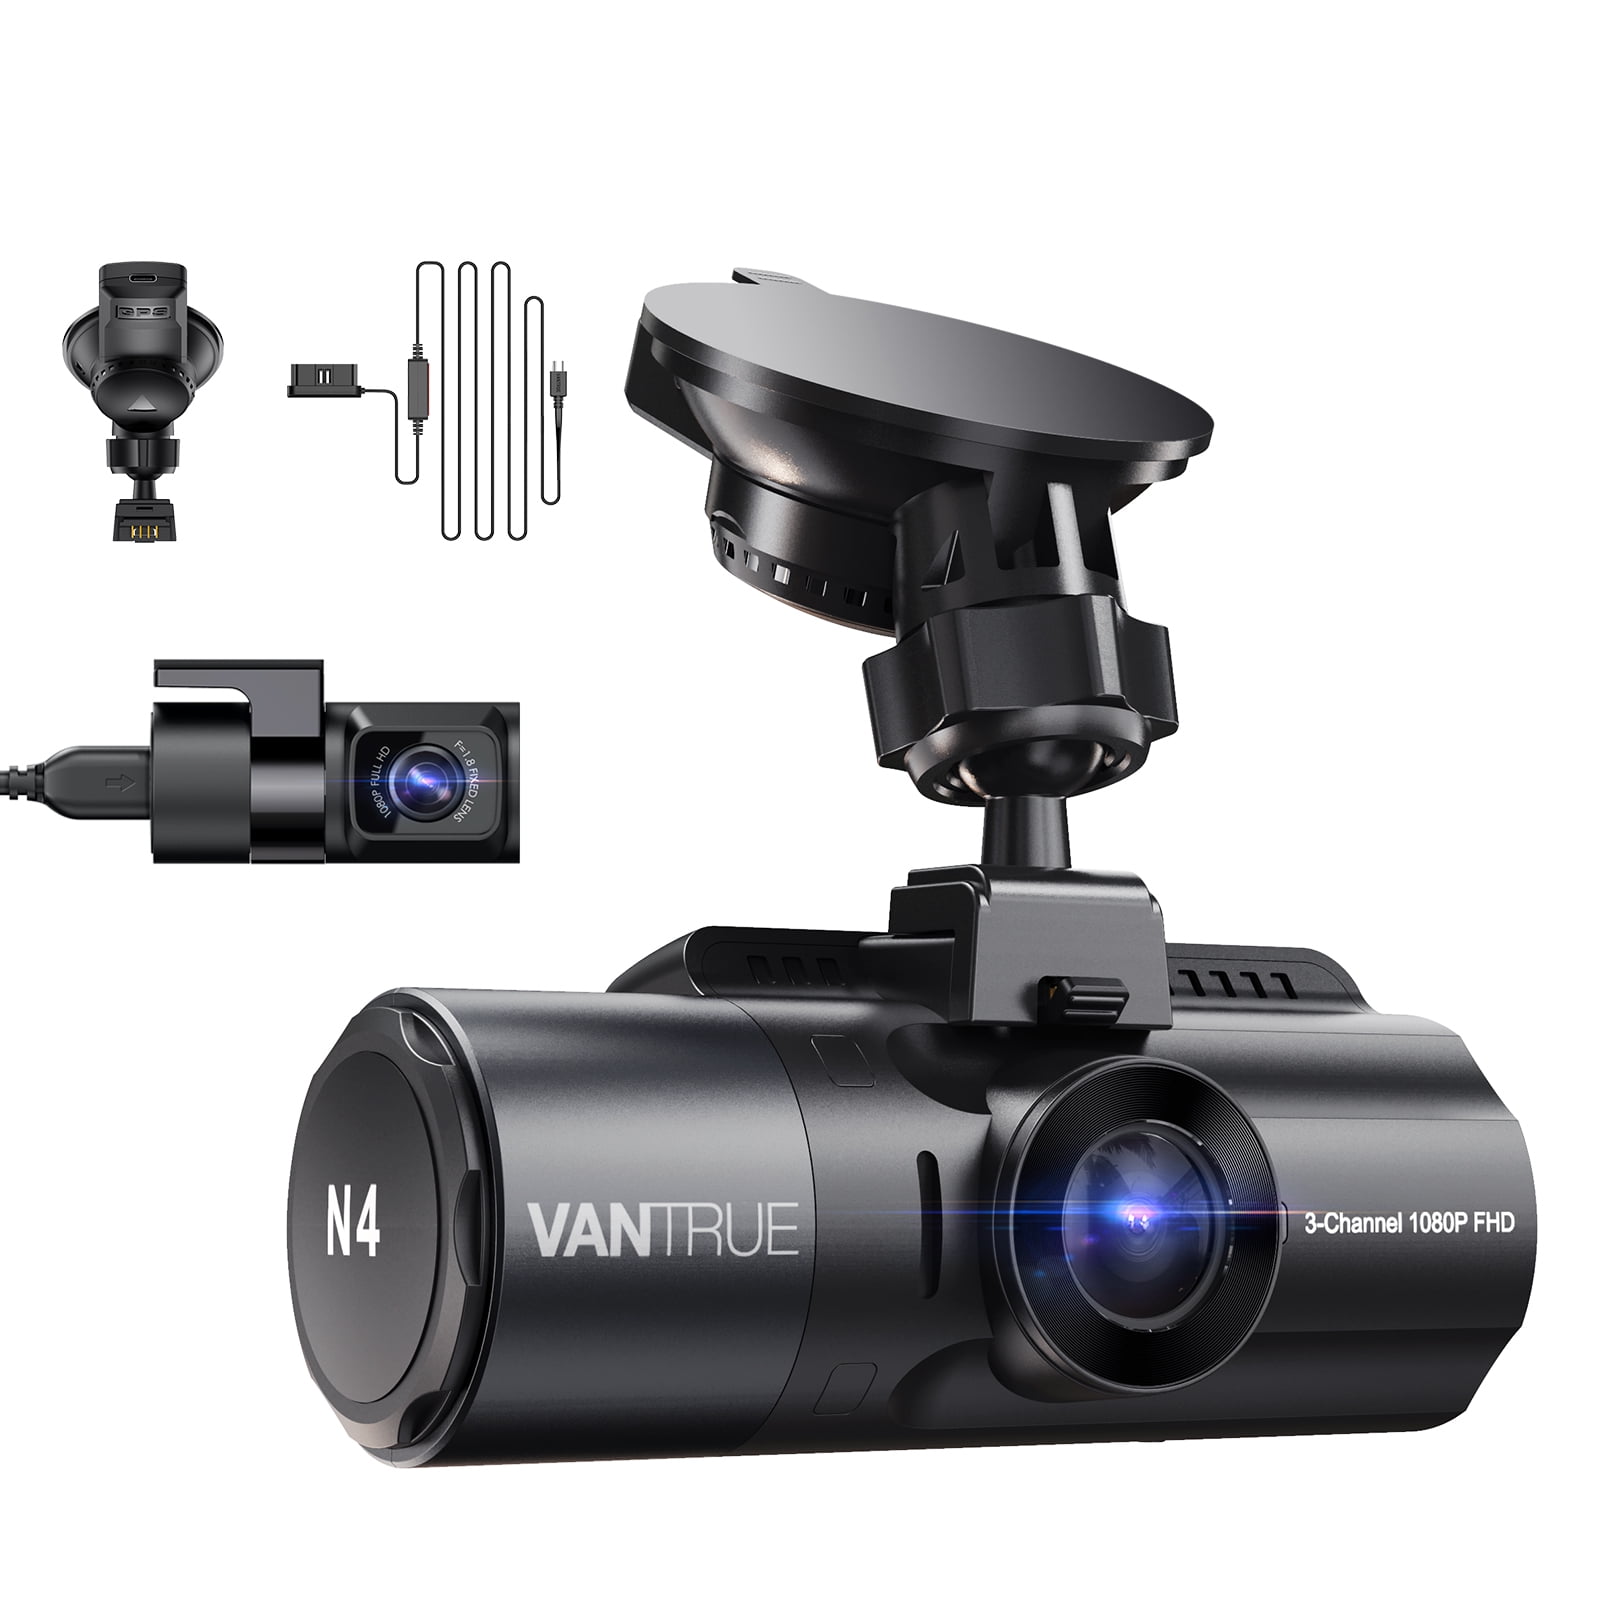 Habitat Geweldig Petulance GPS Mount & OBD Hardwire cable included) Vantrue 3 Channel 4K Dash Cam,  4K+1080P Front and Rear, 4K+1080P Front and Cabin, 1440P+1080P+1080P 3 Way  Triple Car Camera, 24 Hour Parking Mode (N4W) -